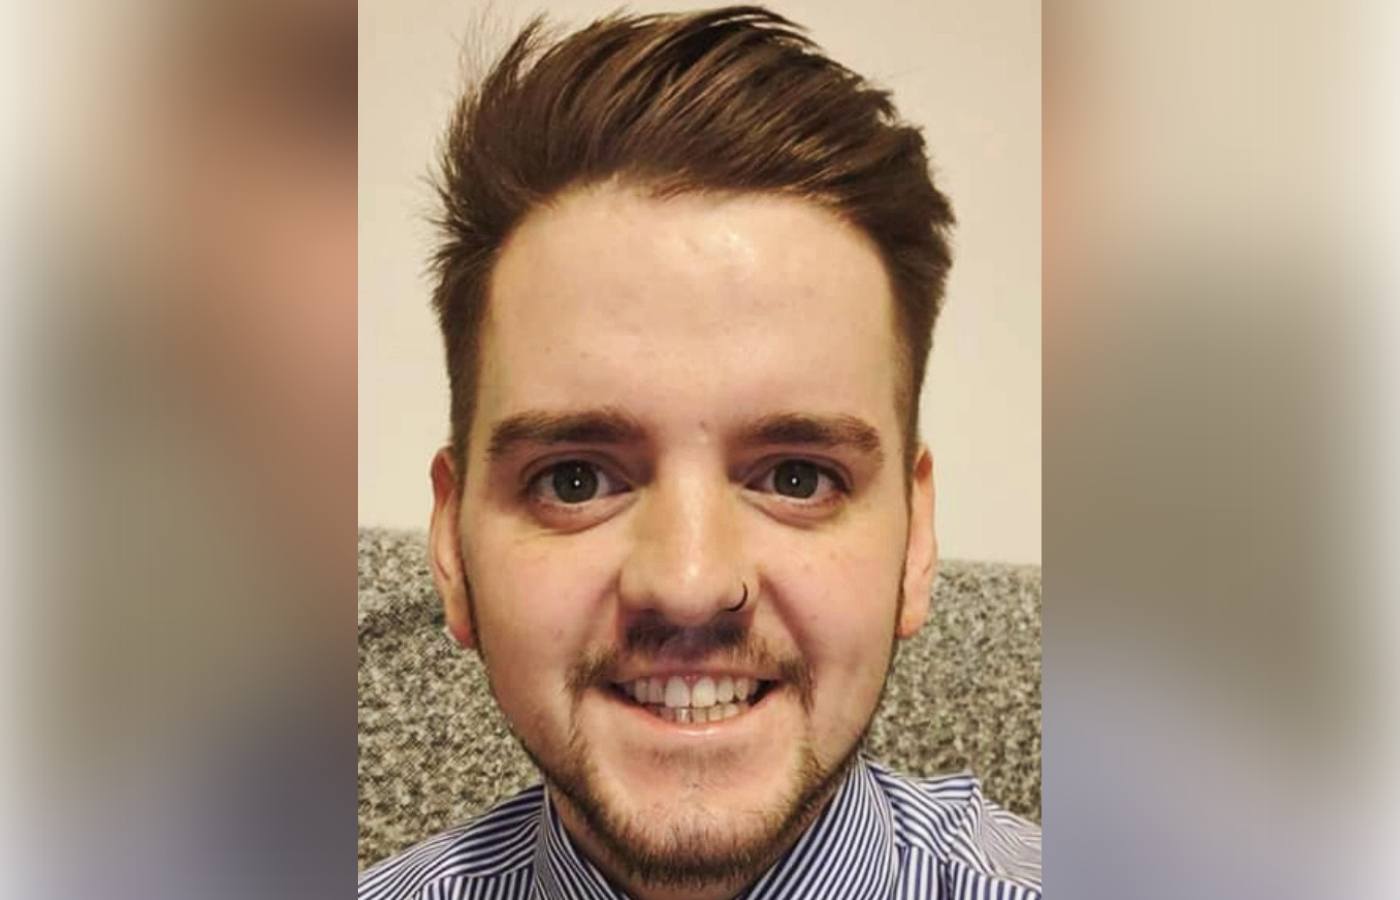 Kyle Zybilowicz was a NHS Greater Glasgow and Clyde healthcare support worker.